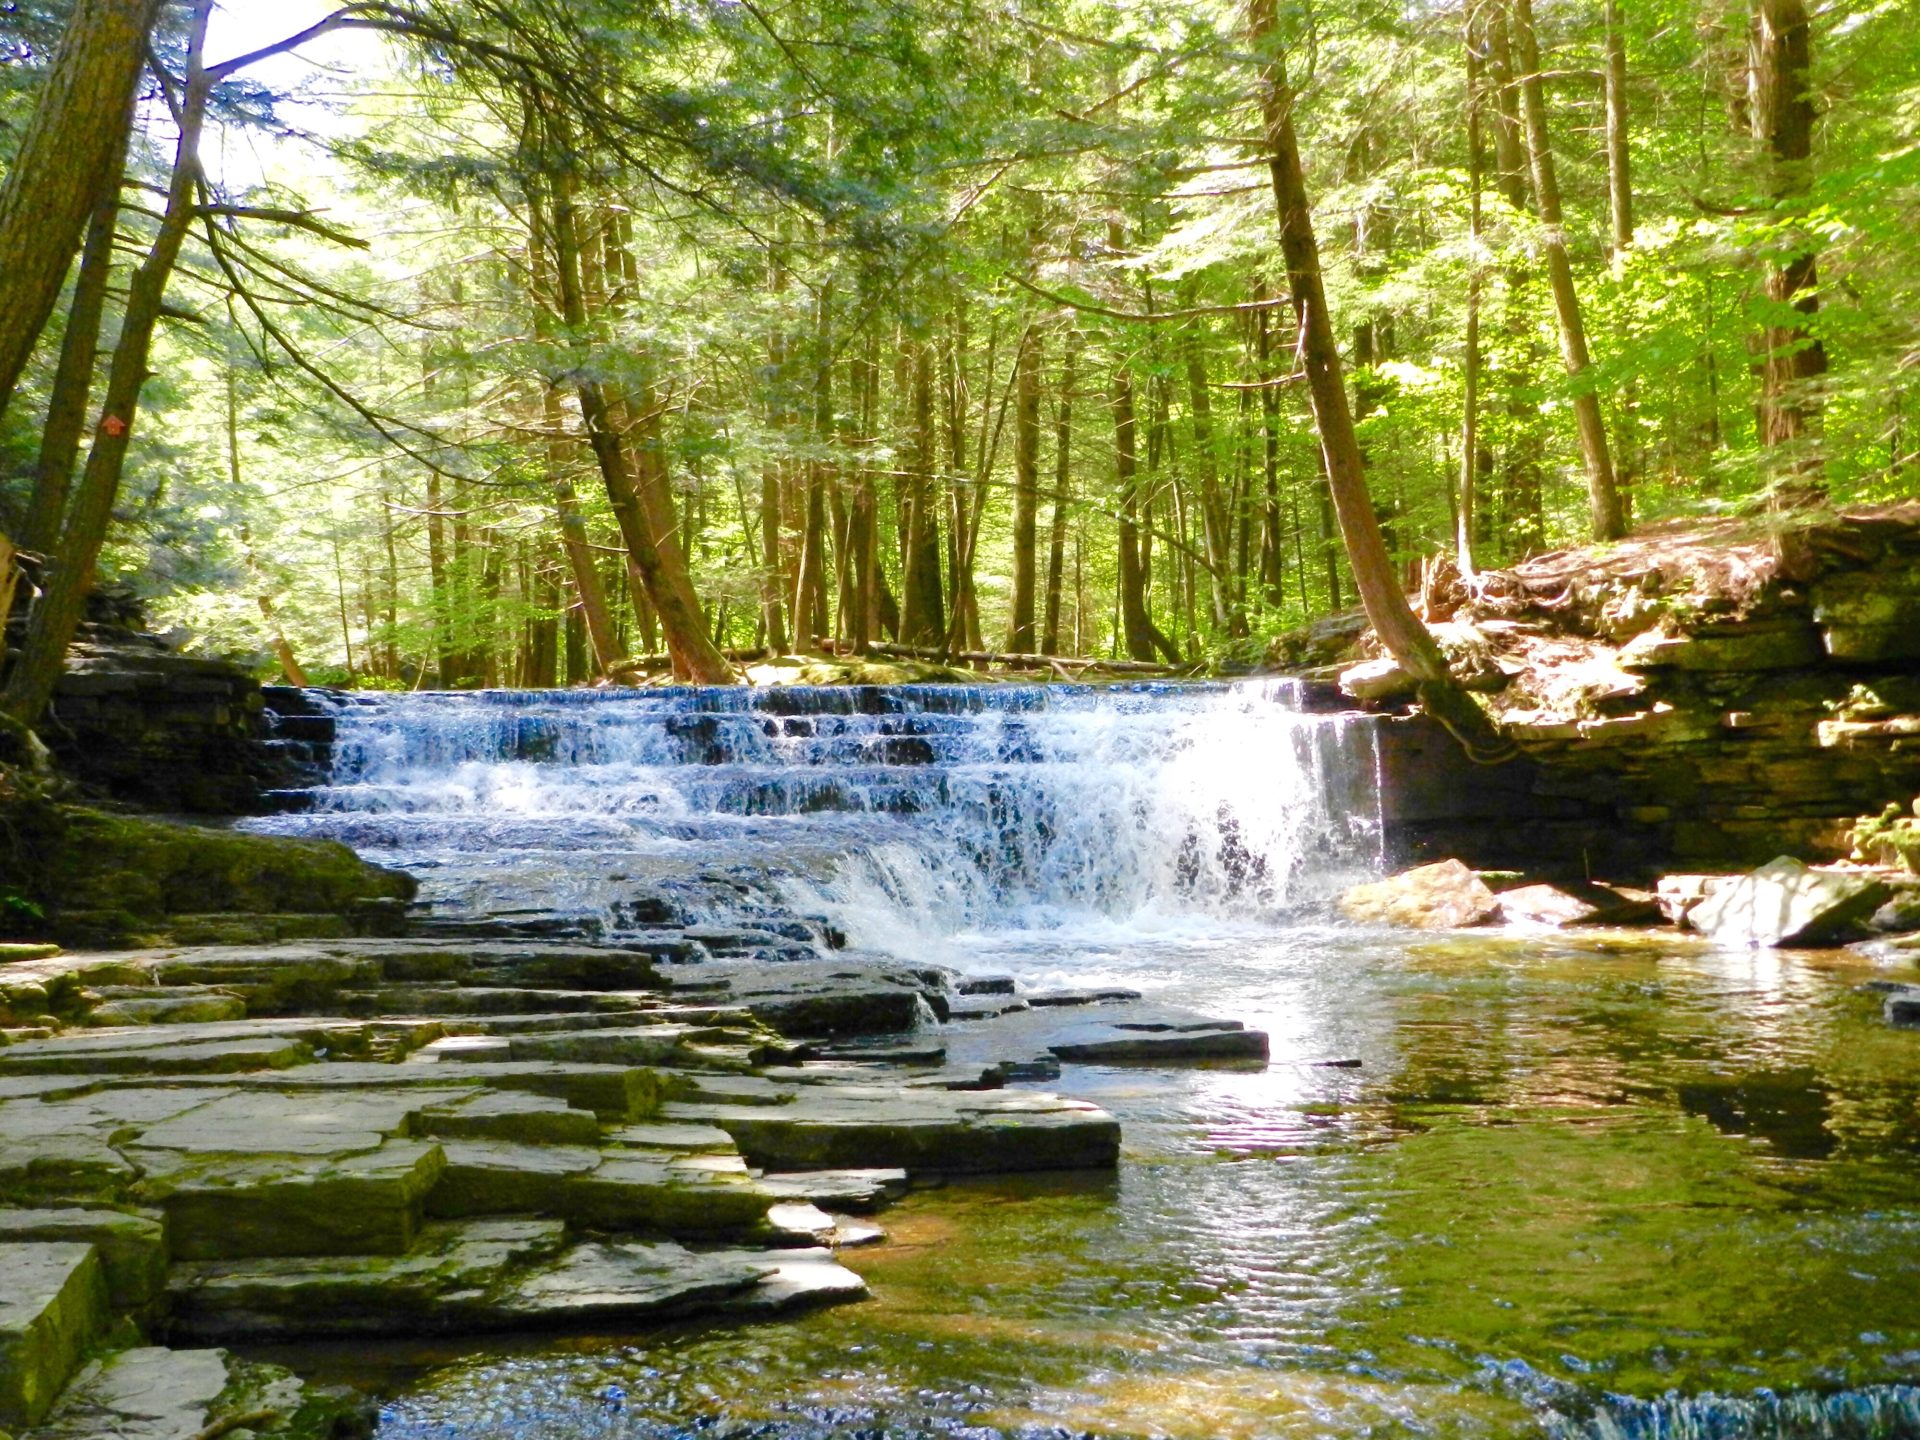 Waterfall surrounded by a hemlock forest